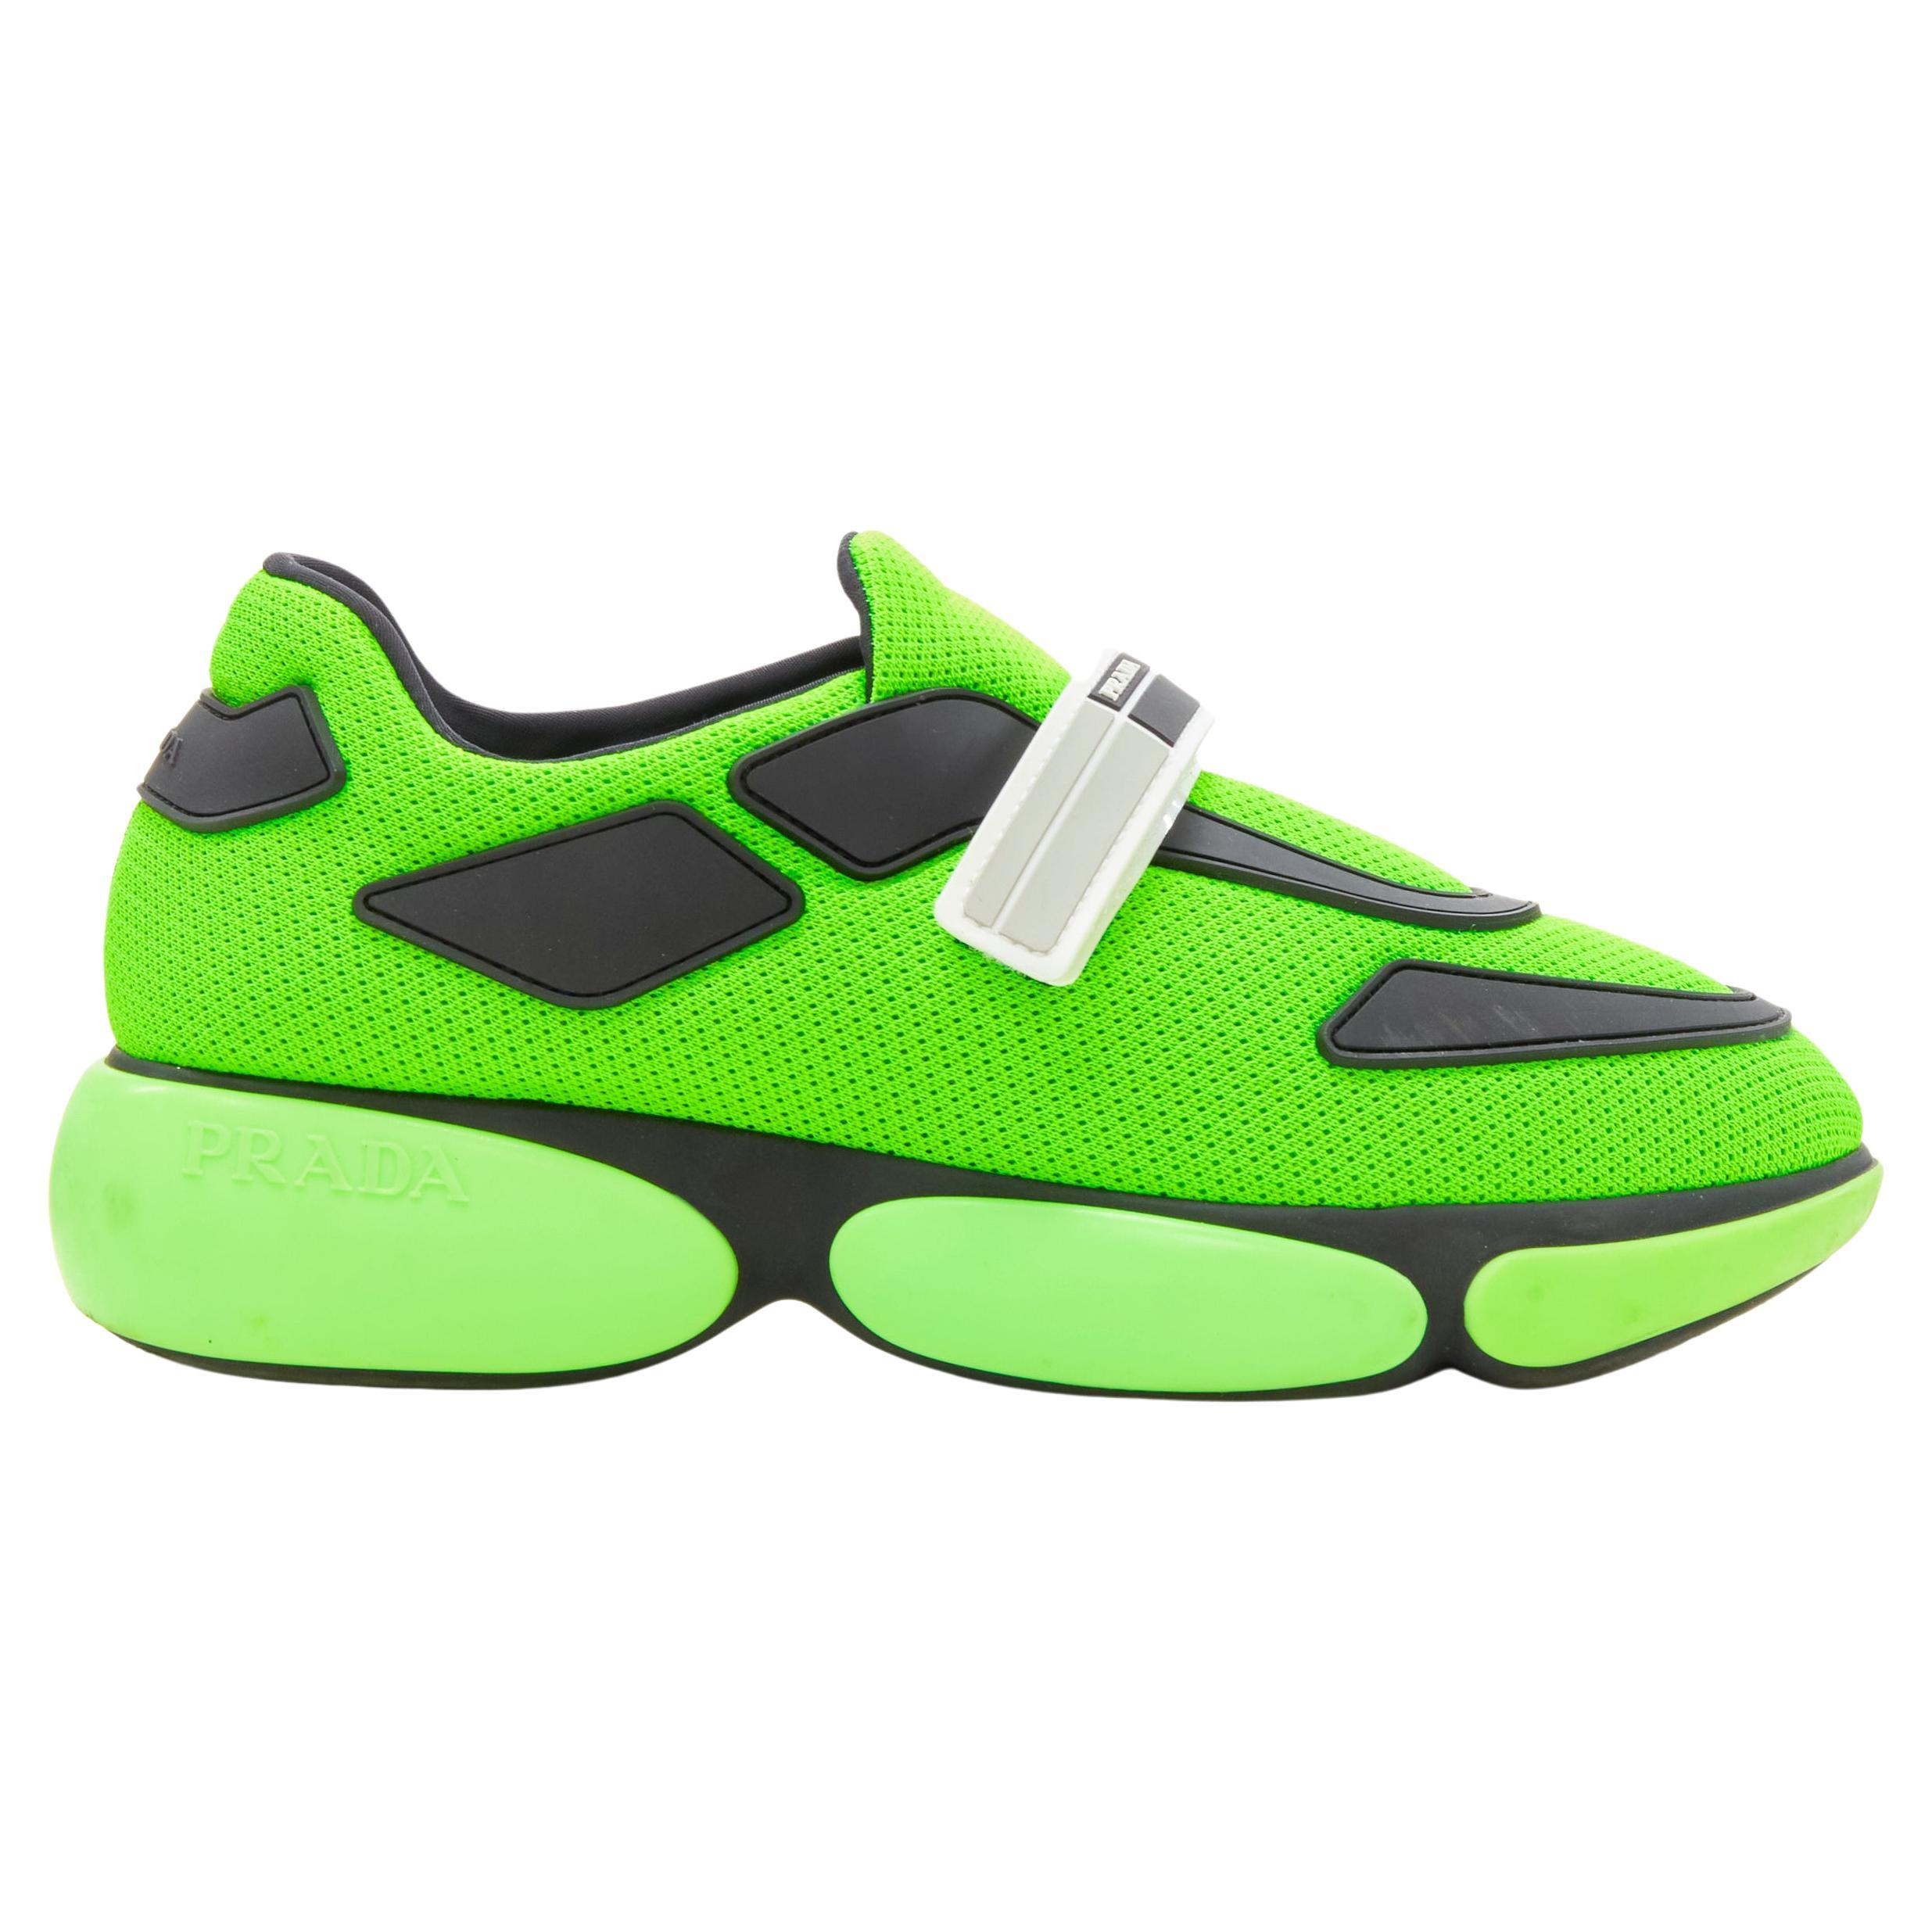 Luxury Designer Mens Casual Sneakers Fluorescent Yellow And White Calfskin  Tennis Shoes For Men MKJJK00002 From Mxk001, $136.24 | DHgate.Com